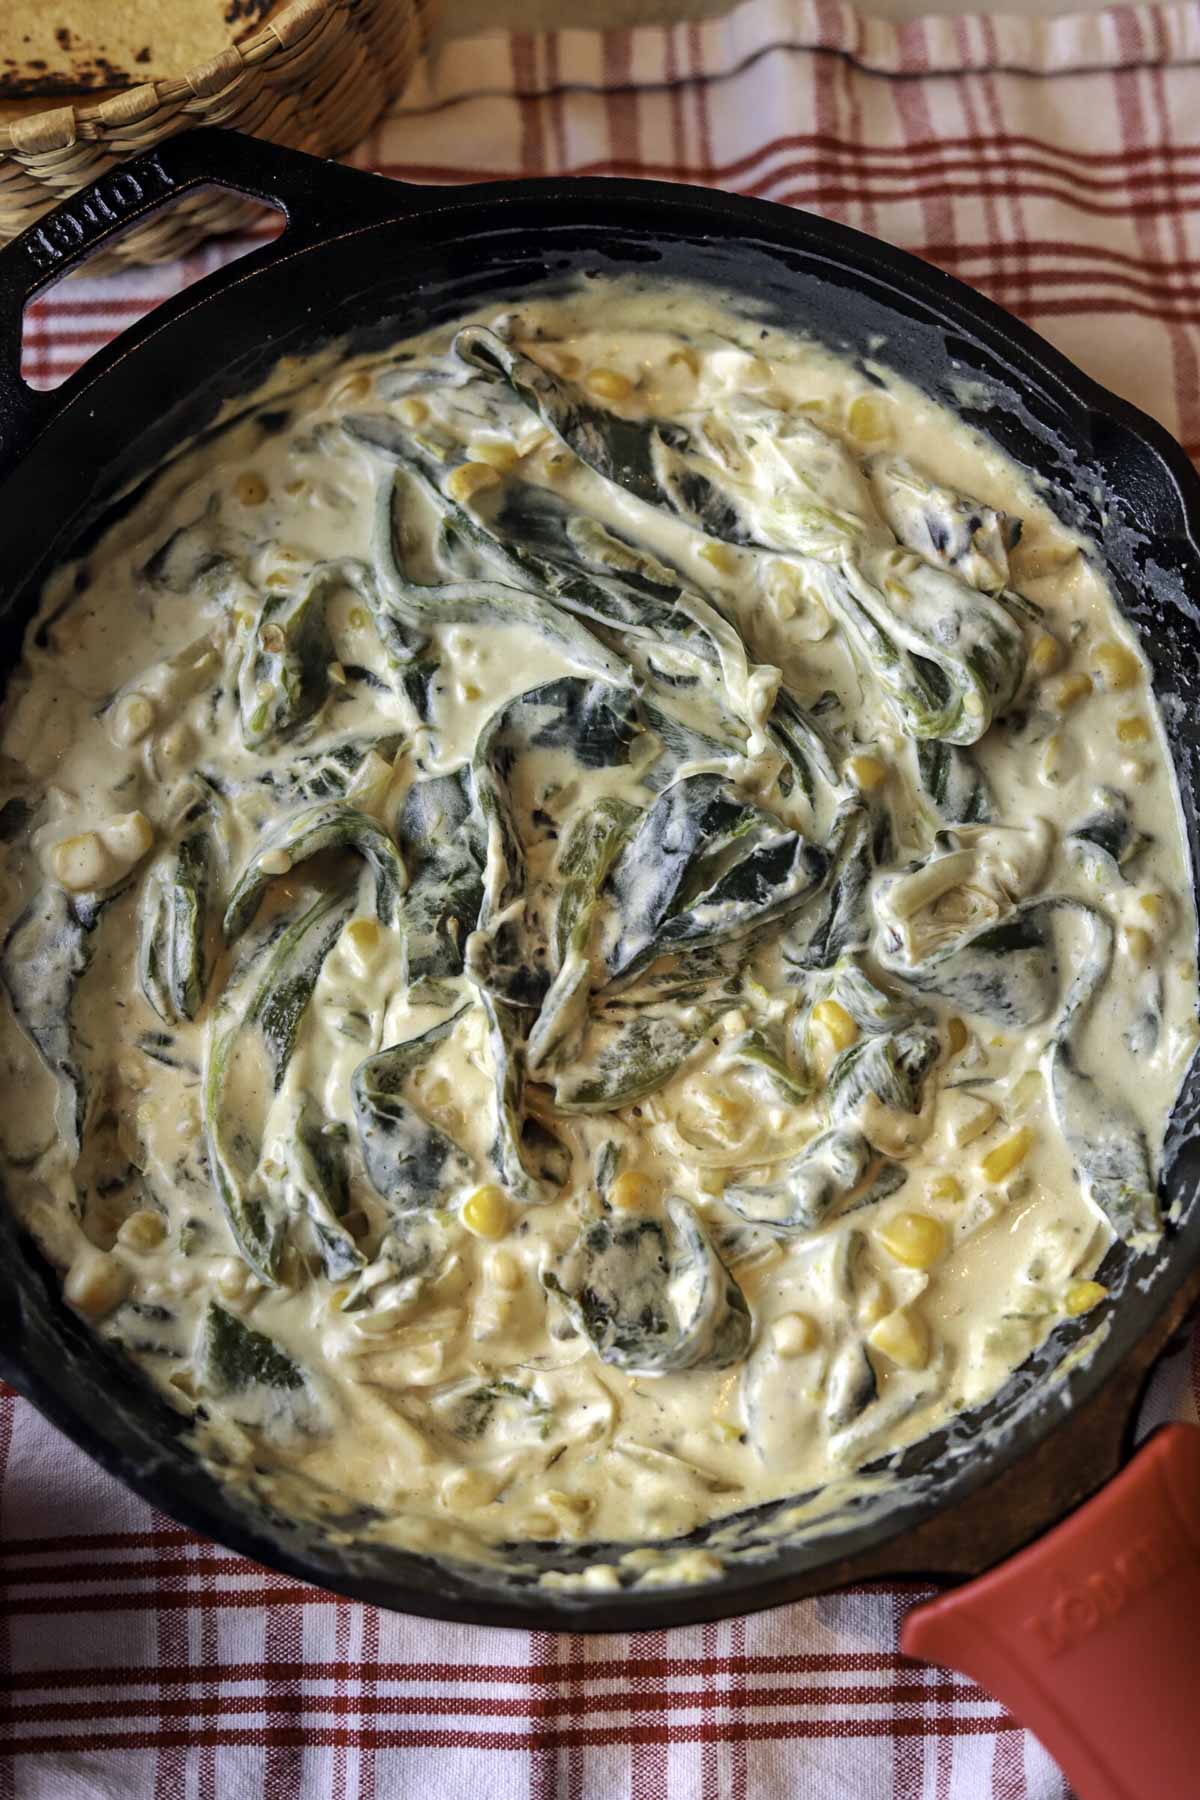 Rajas con Crema on a red and white checkered towel